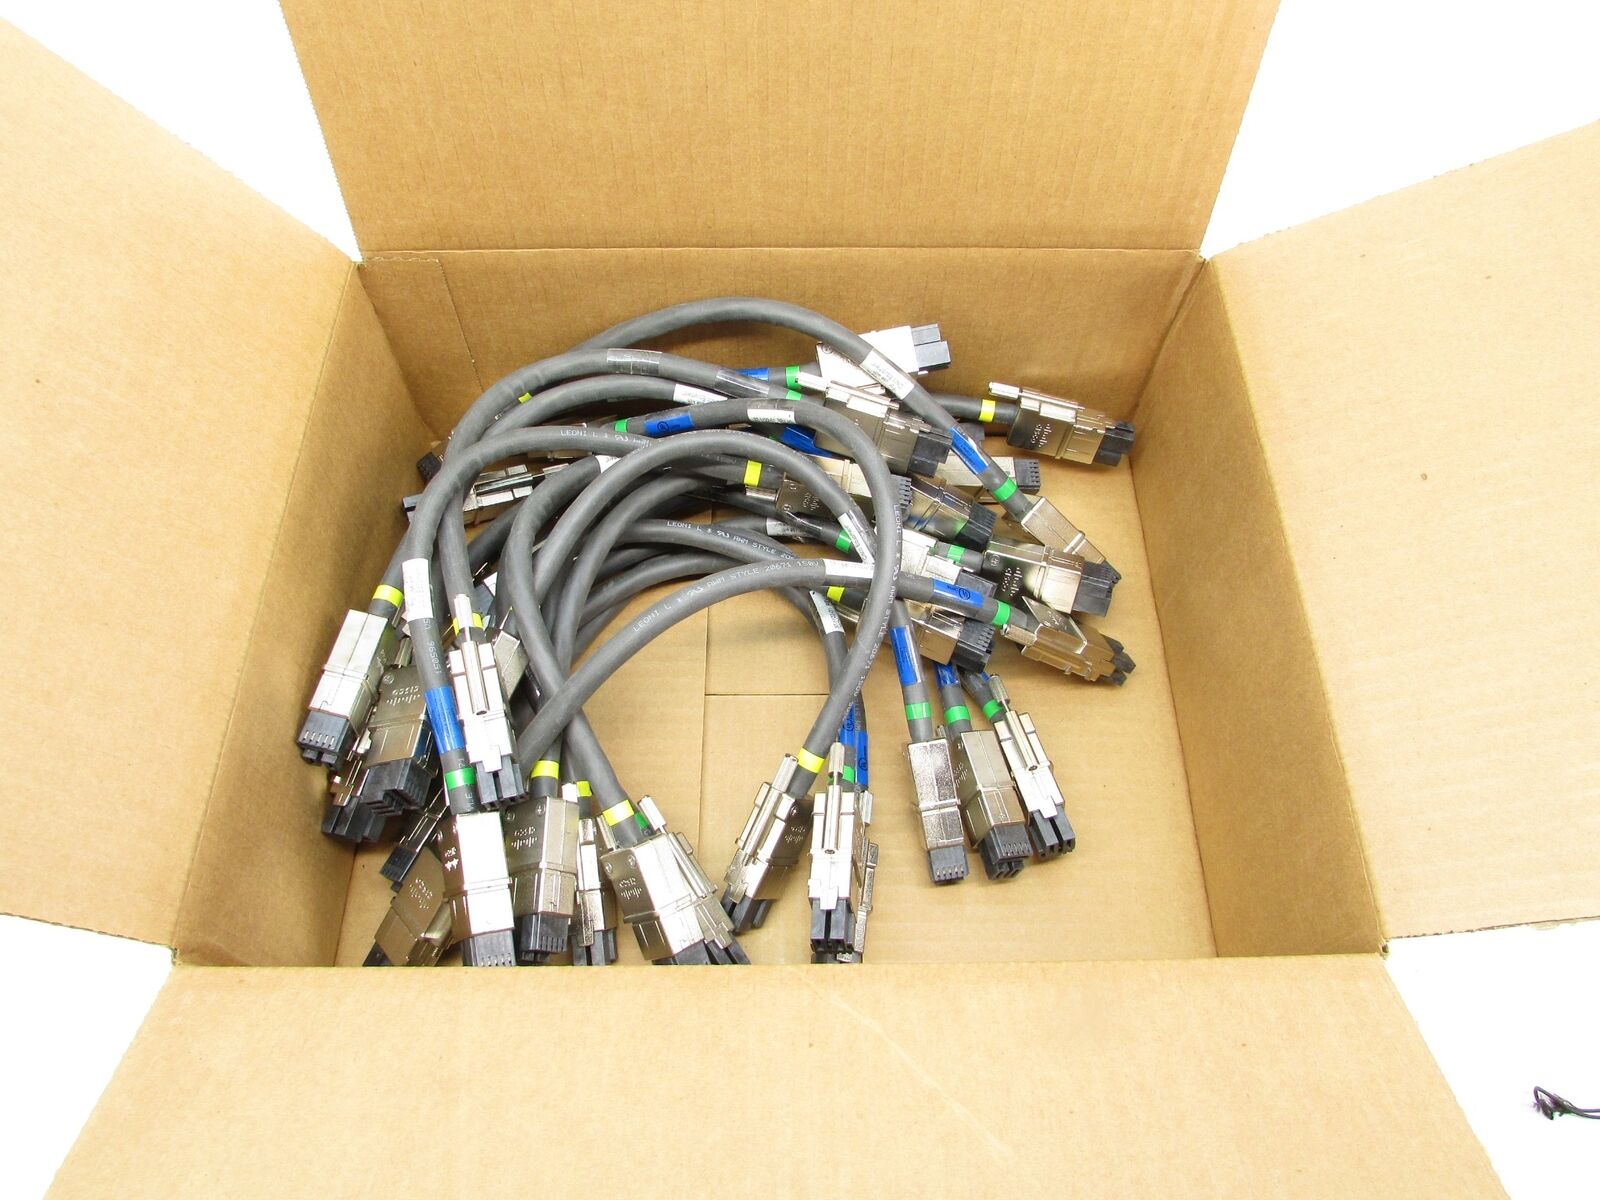 Lot of 20x Cisco Catalyst 37-1122-01 Power Stacking Cables for 3750/3850